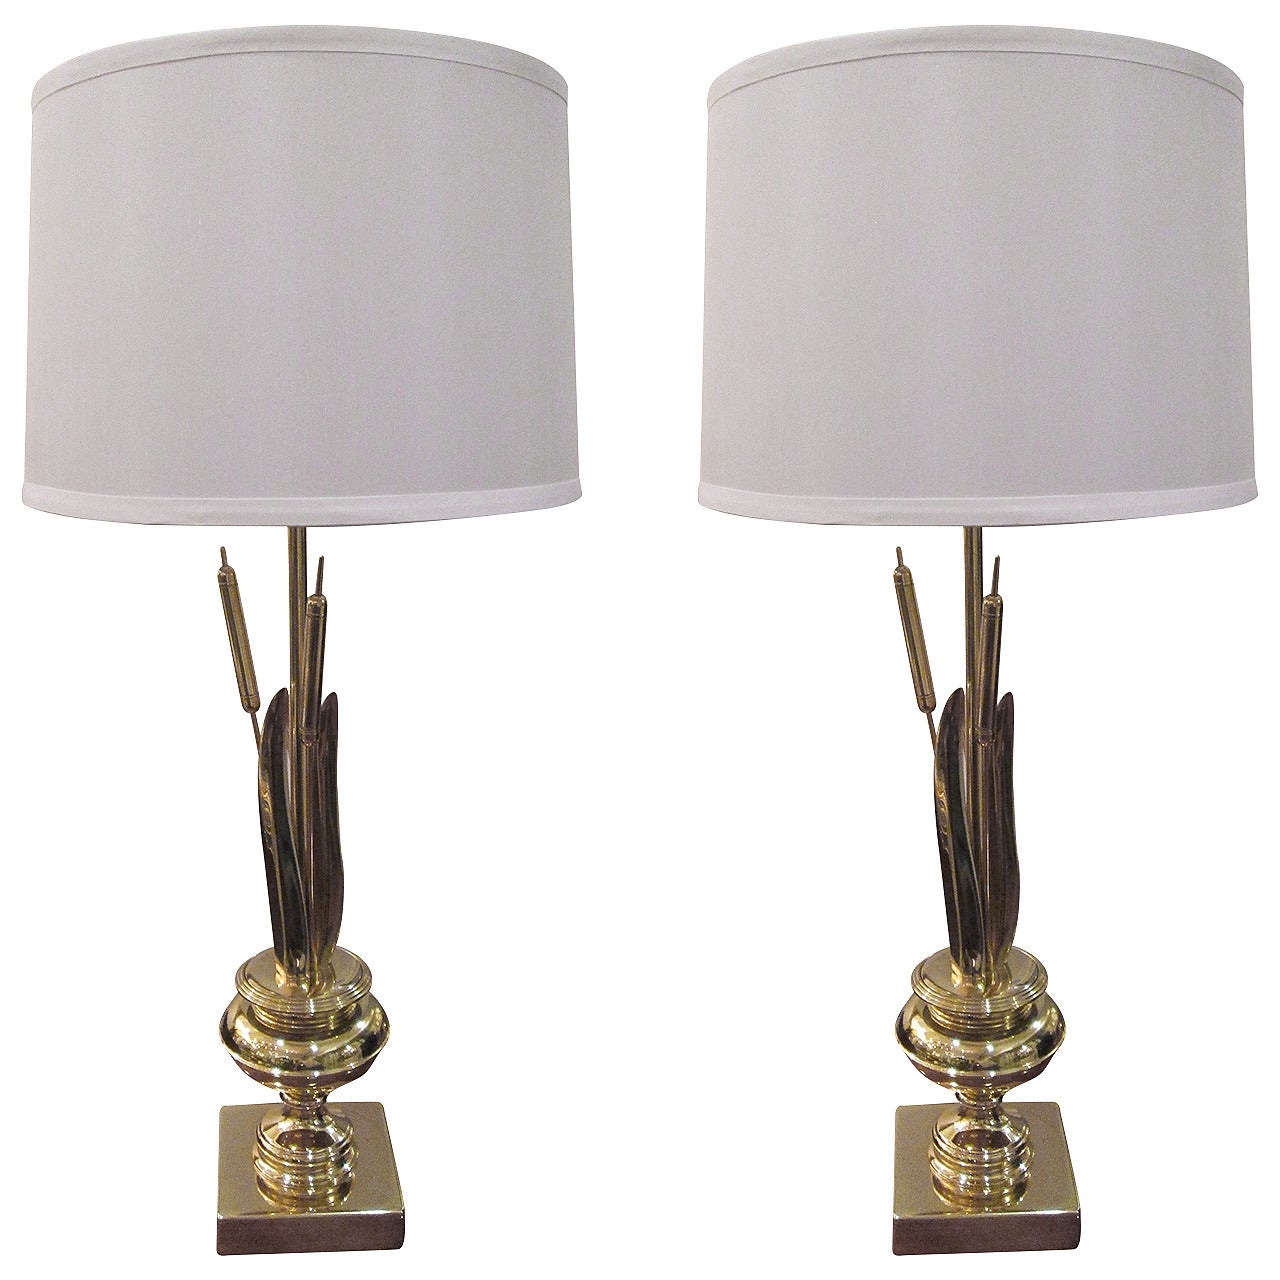 Pair of vintage brass cattail table lamps attributed to Maison Charles

The height of 28.5